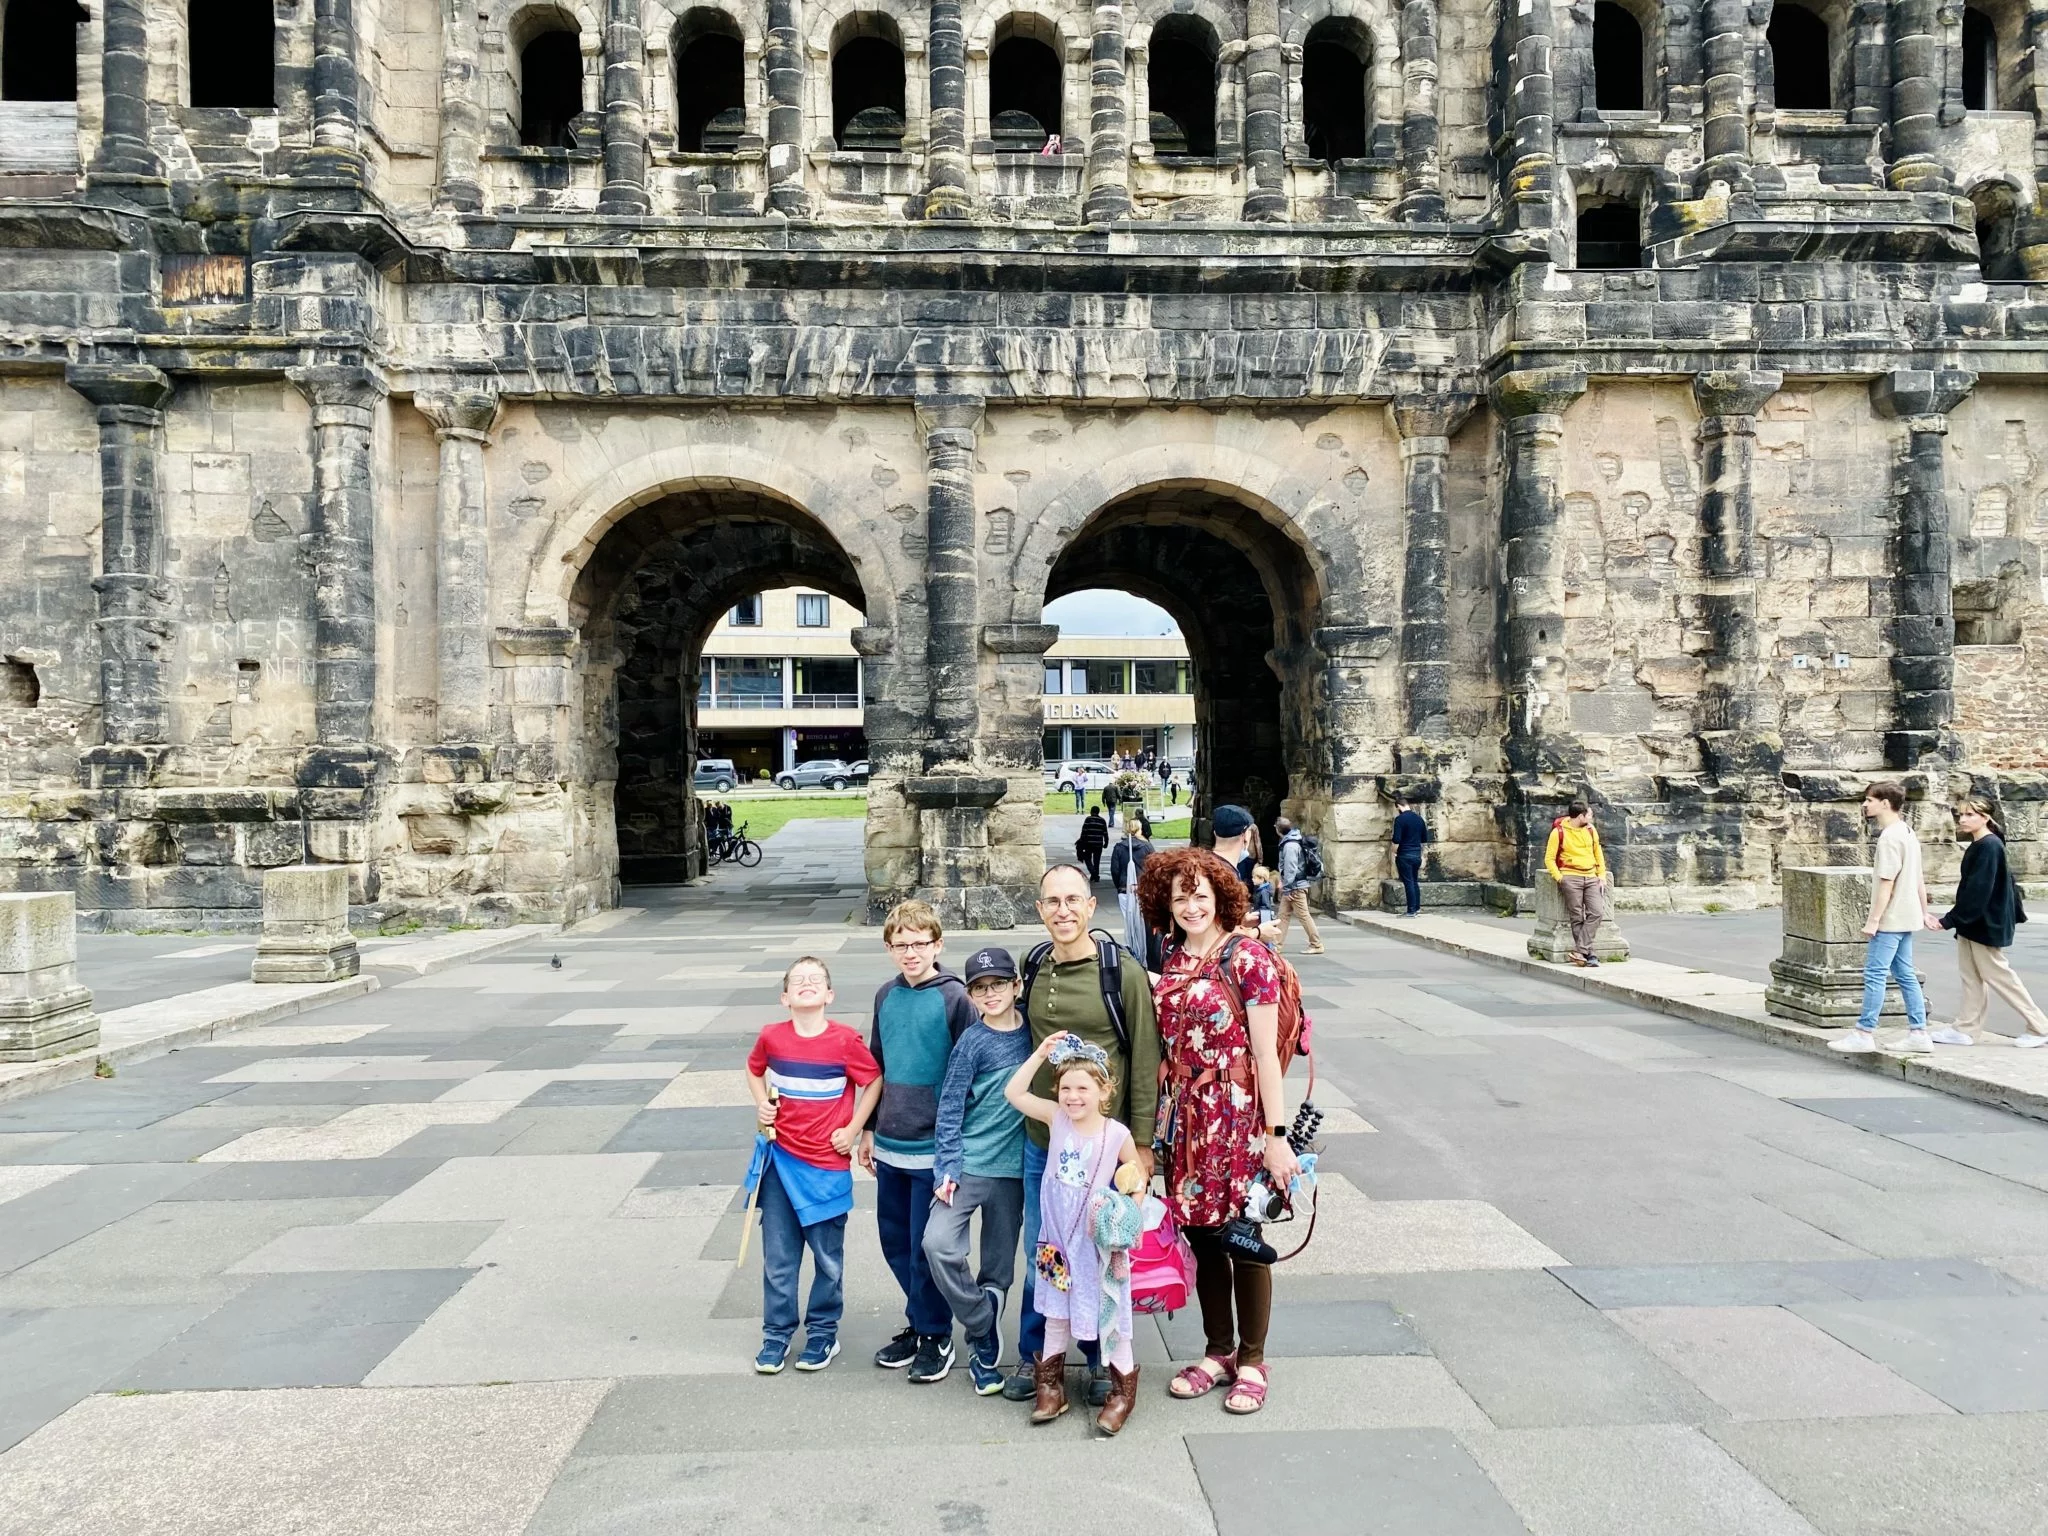 Our family visiting Trier, one of the oldest cities in Germany!